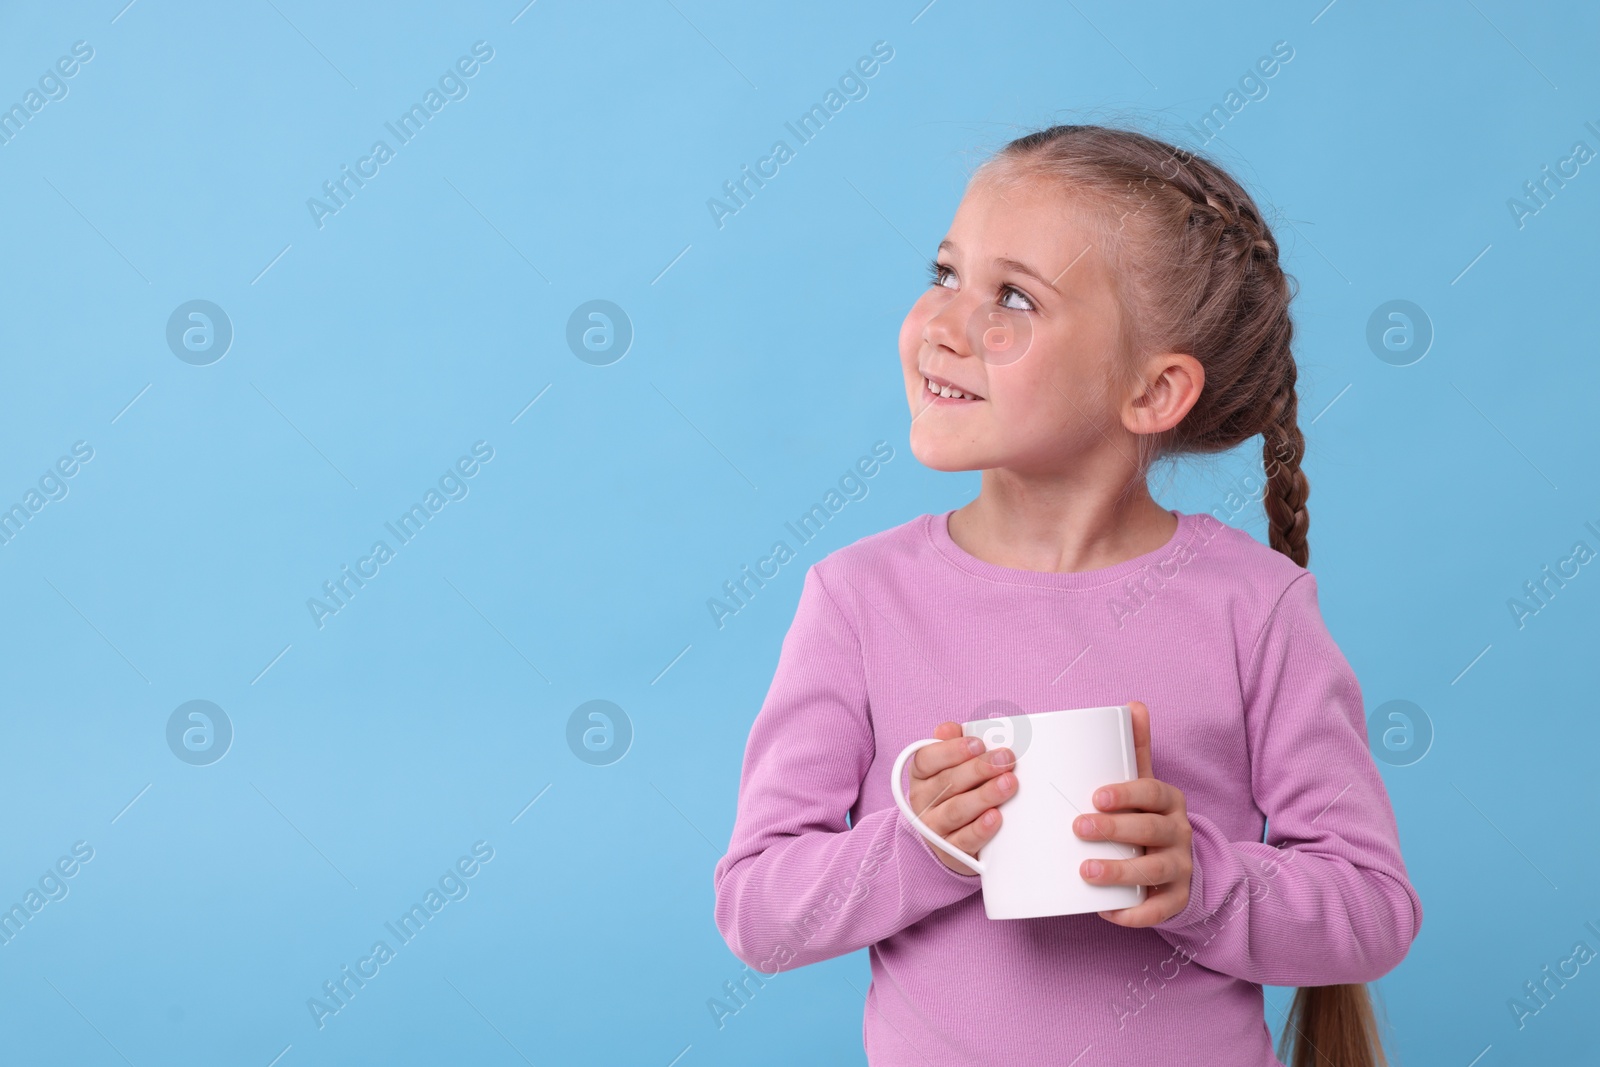 Photo of Happy girl with white ceramic mug on light blue background, space for text